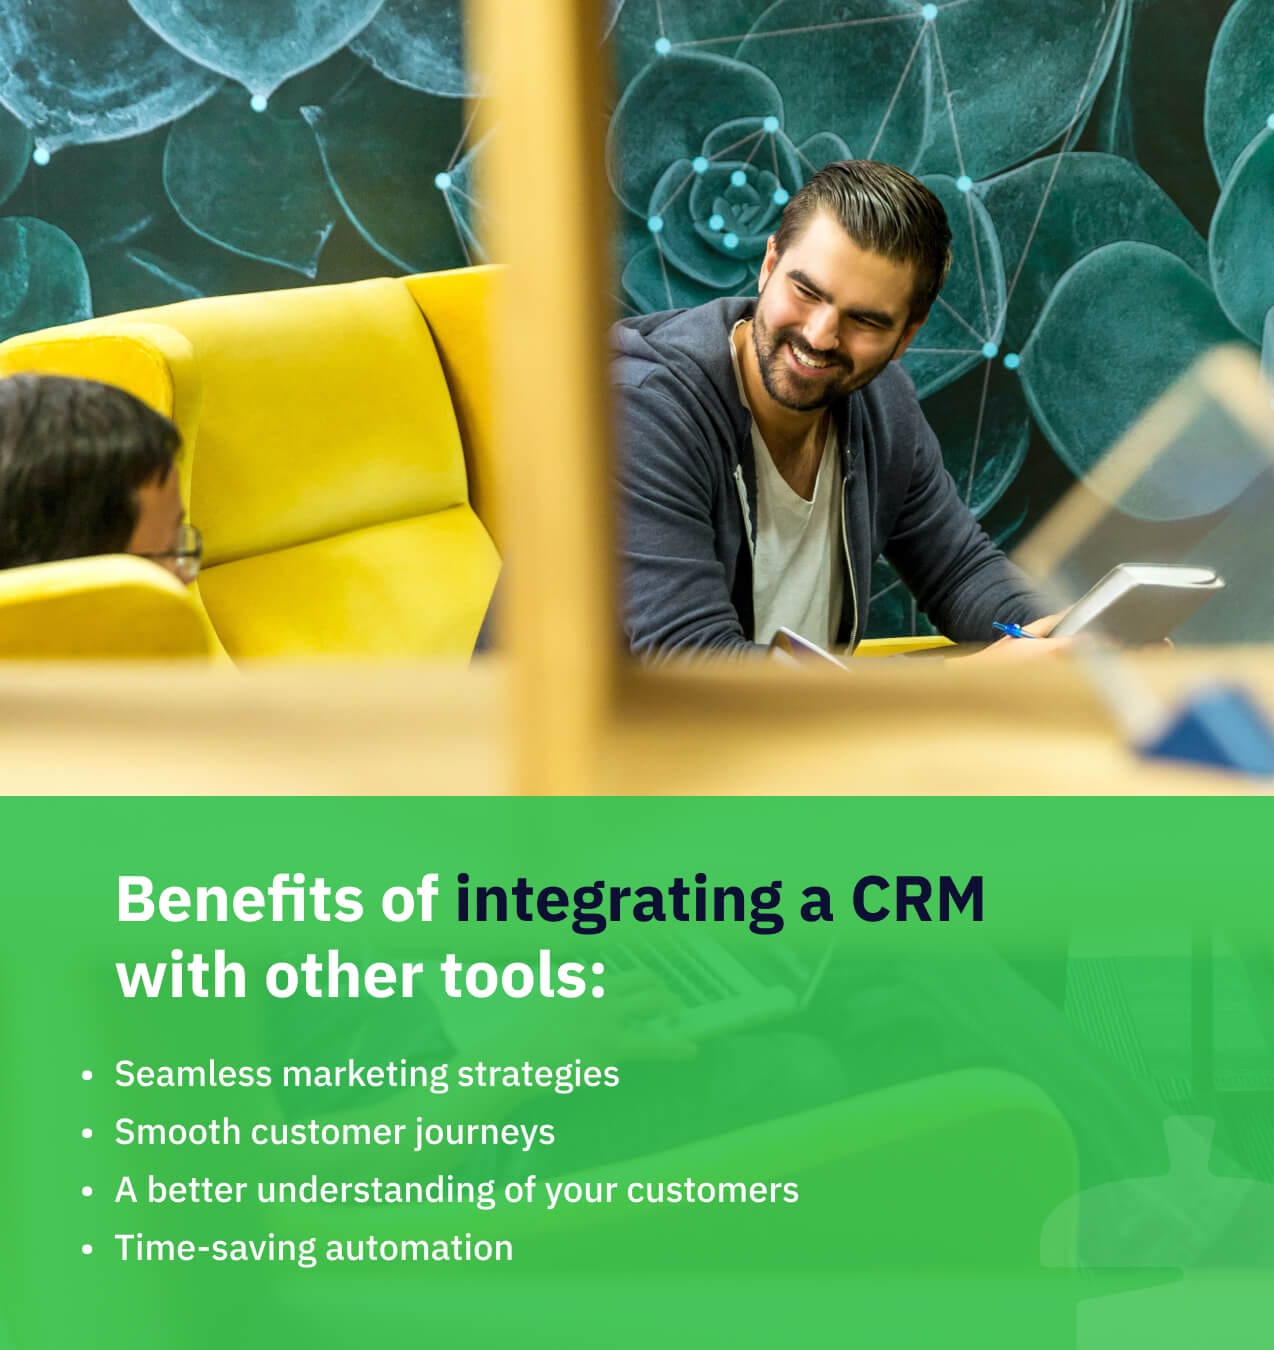 Benefits of integrating a CRM with other tools